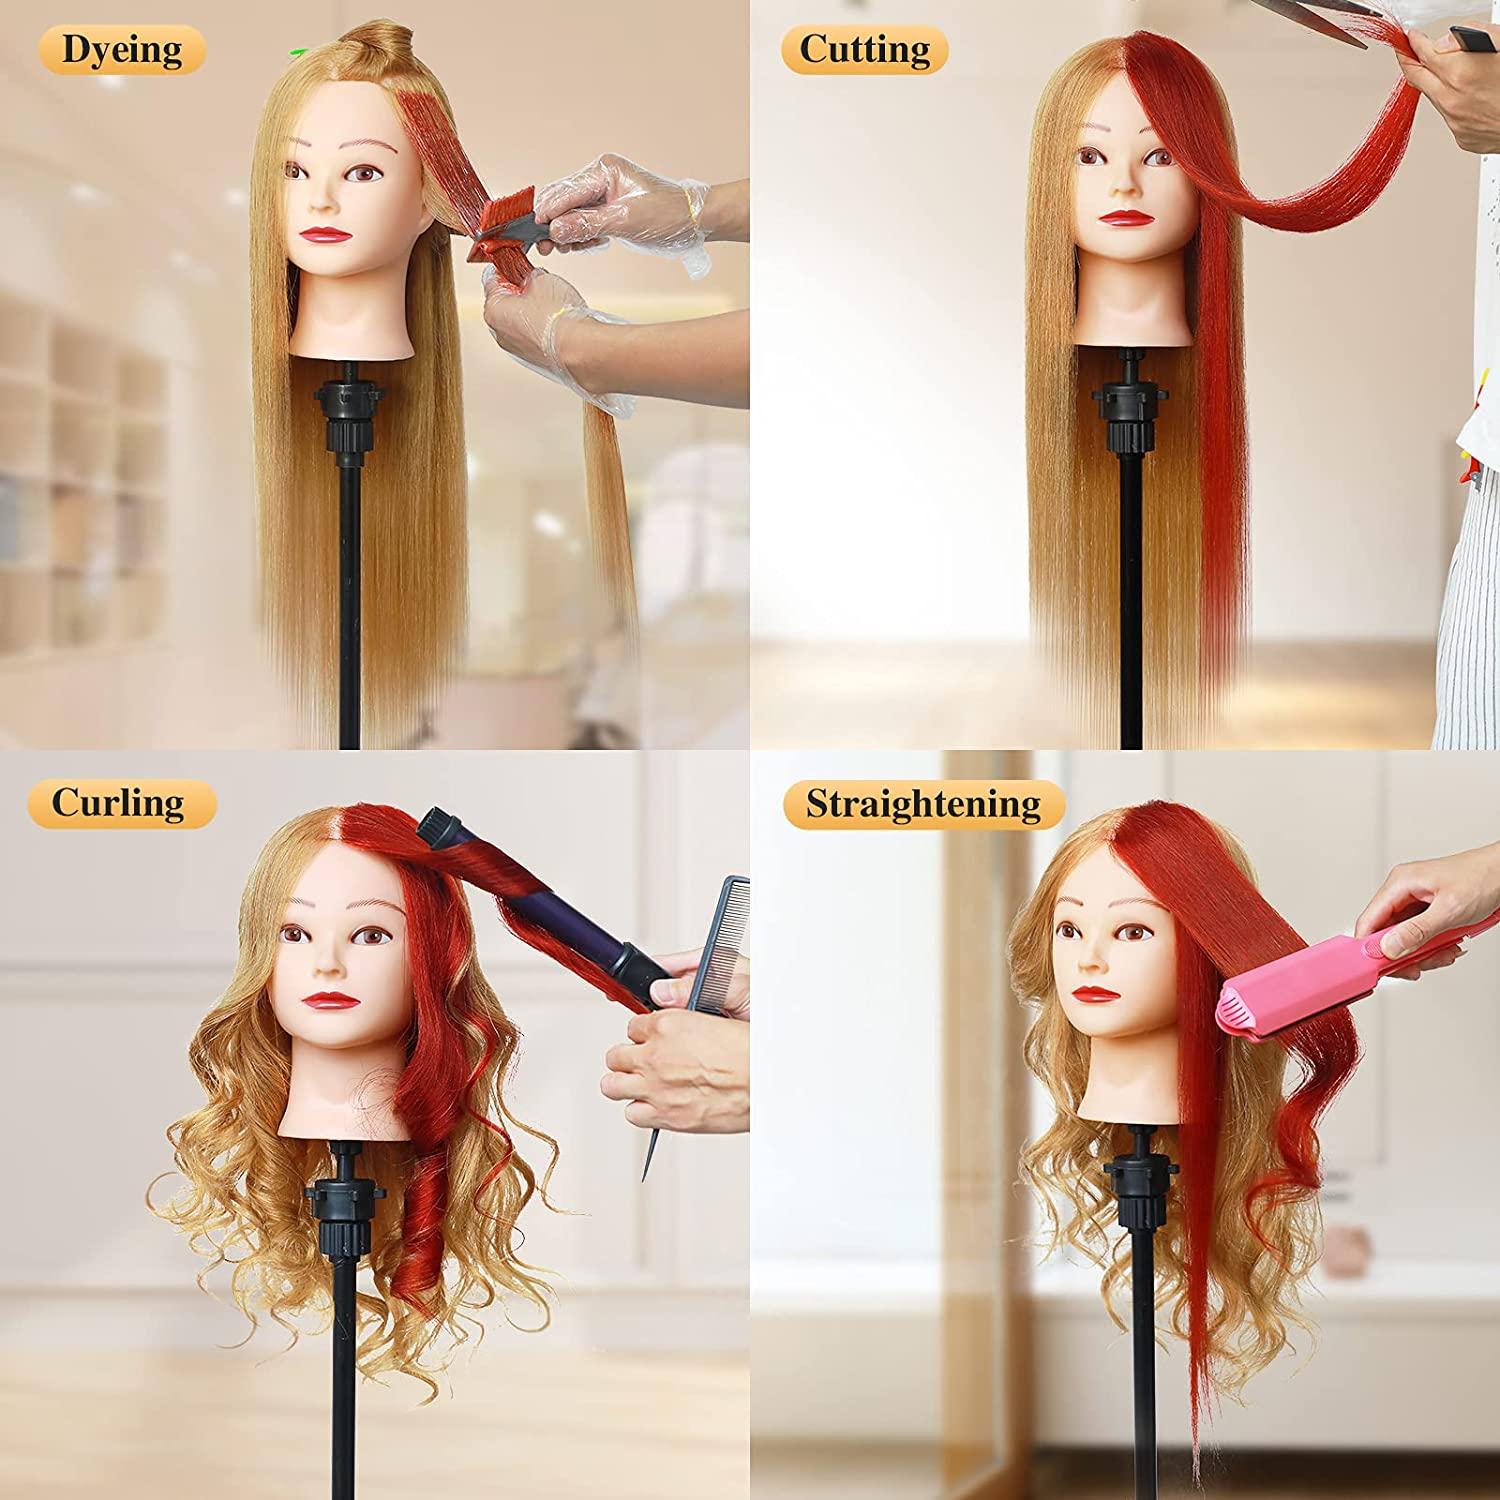 Mannequin Heads with 100% Human Hair at